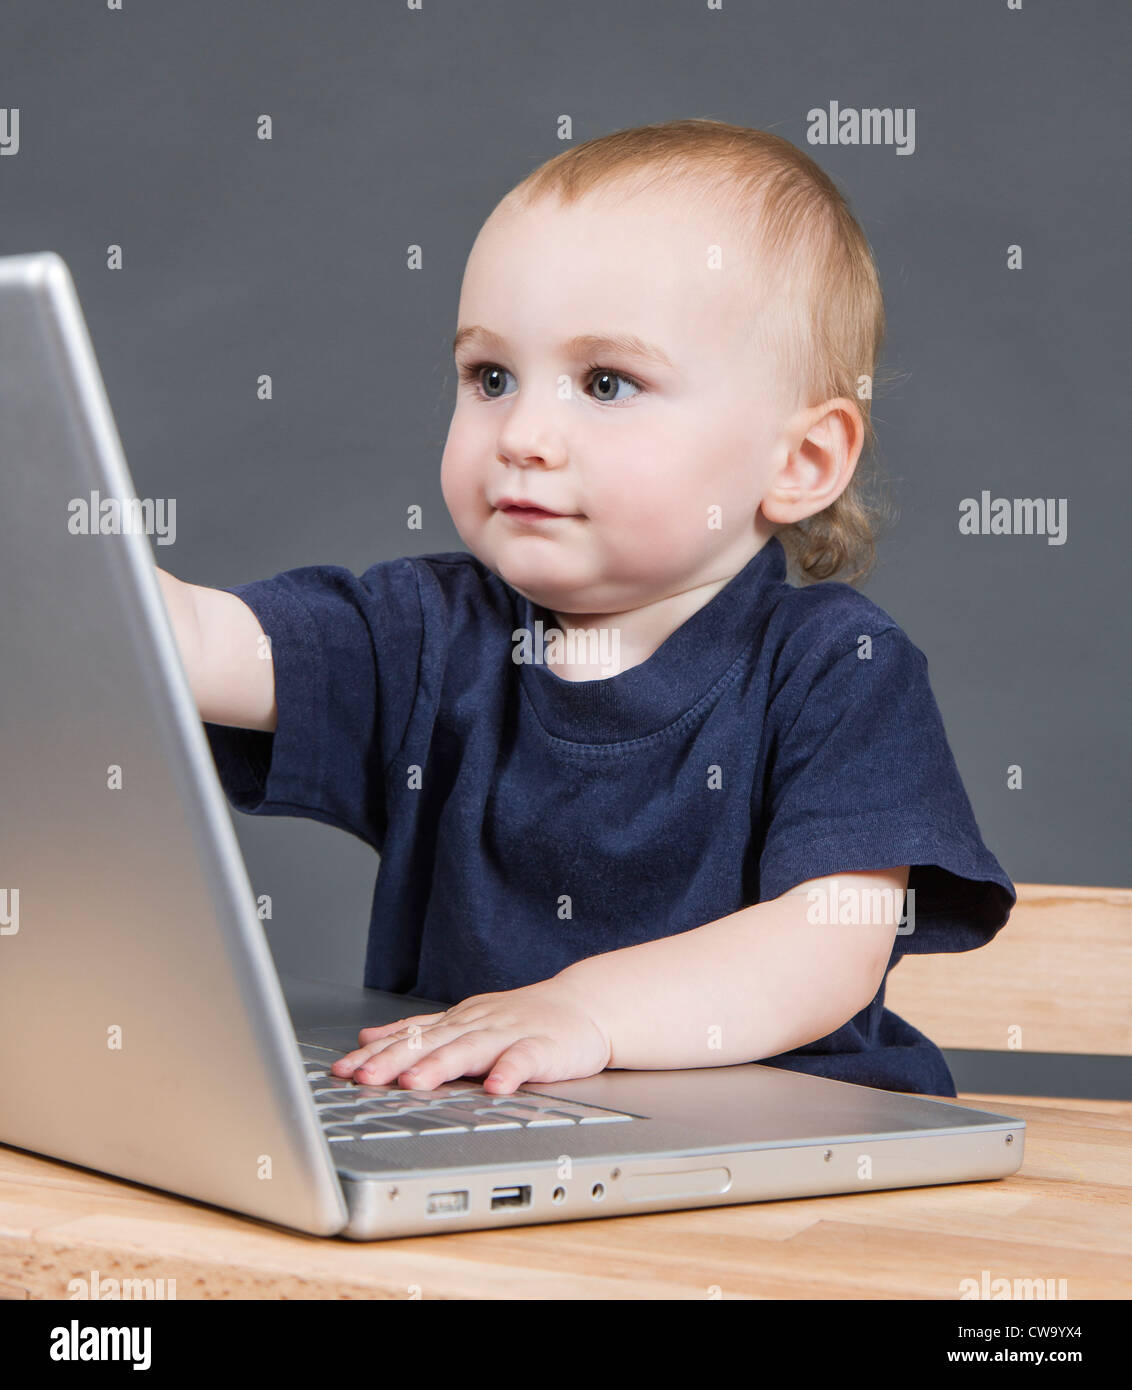 young child with laptop computer on wooden desk in grey background Stock Photo